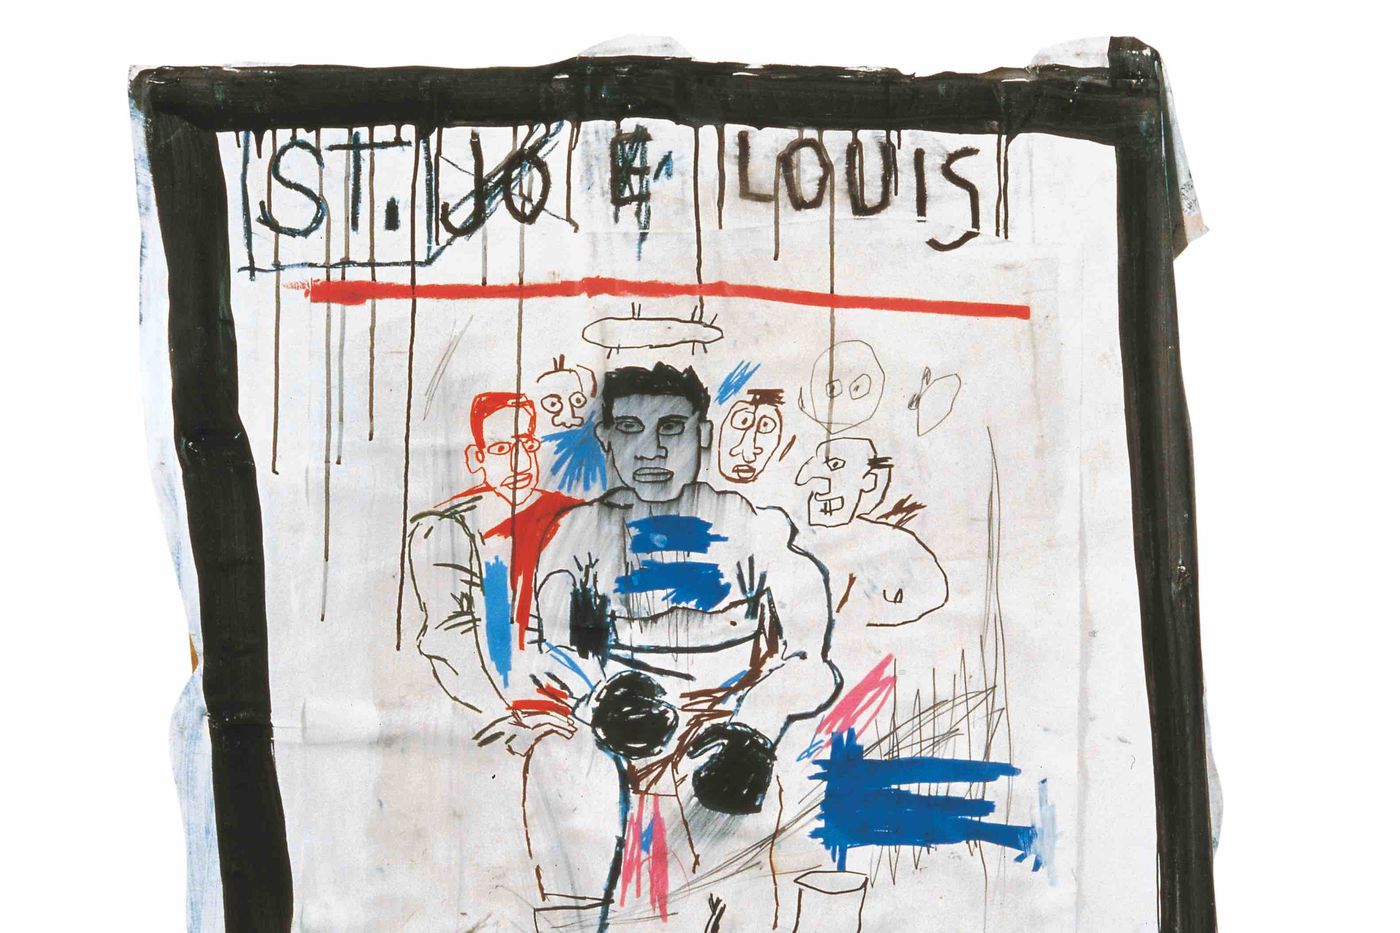 A Dazzling Basquiat Show Opens the New Brant Foundation Space